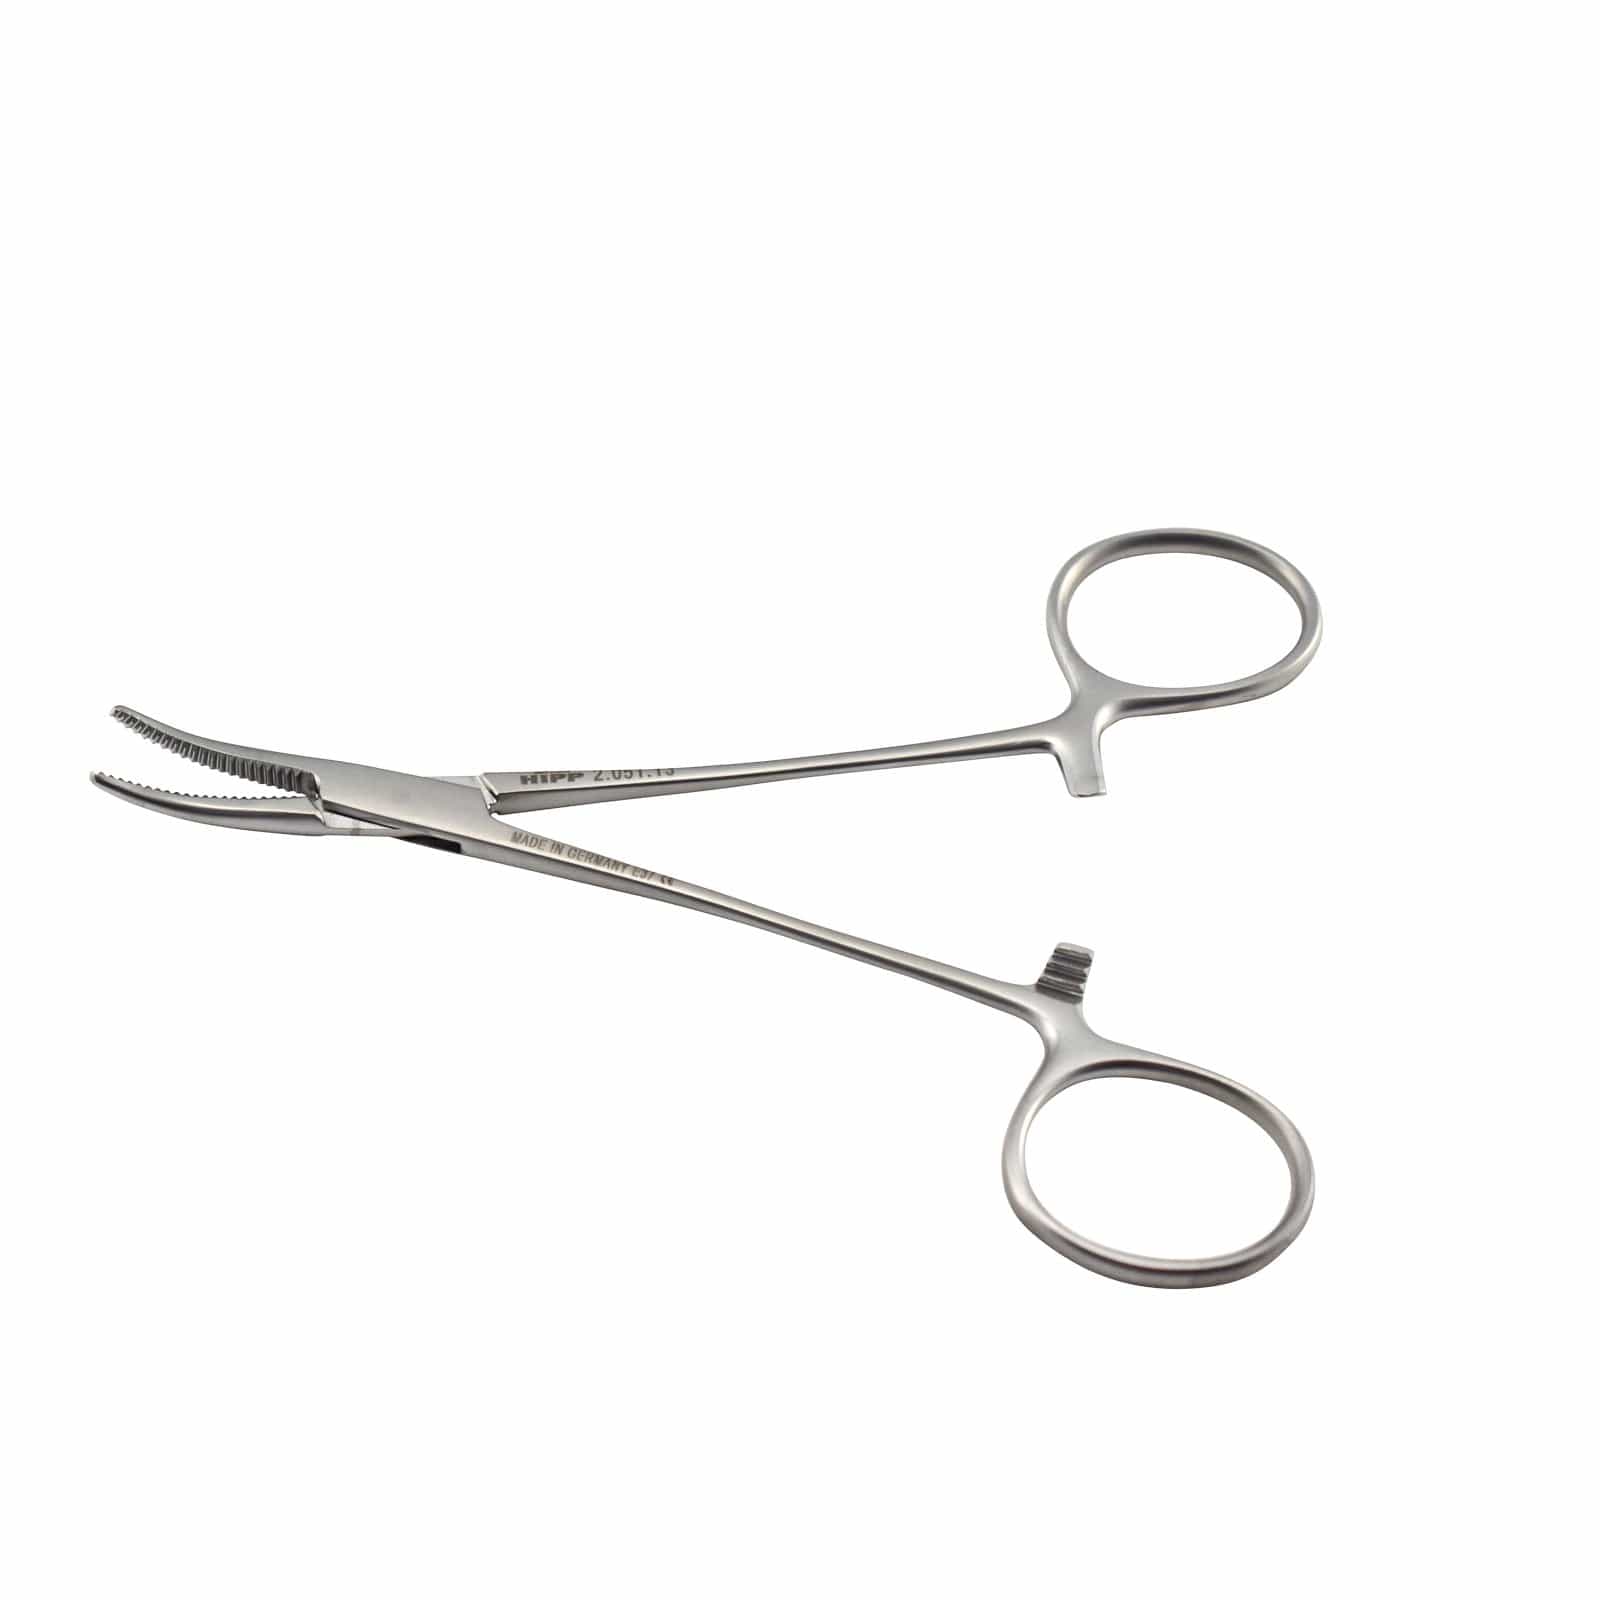 Hipp Surgical Instruments 13cm / Curved Hipp Spencer Wells Artery Forceps